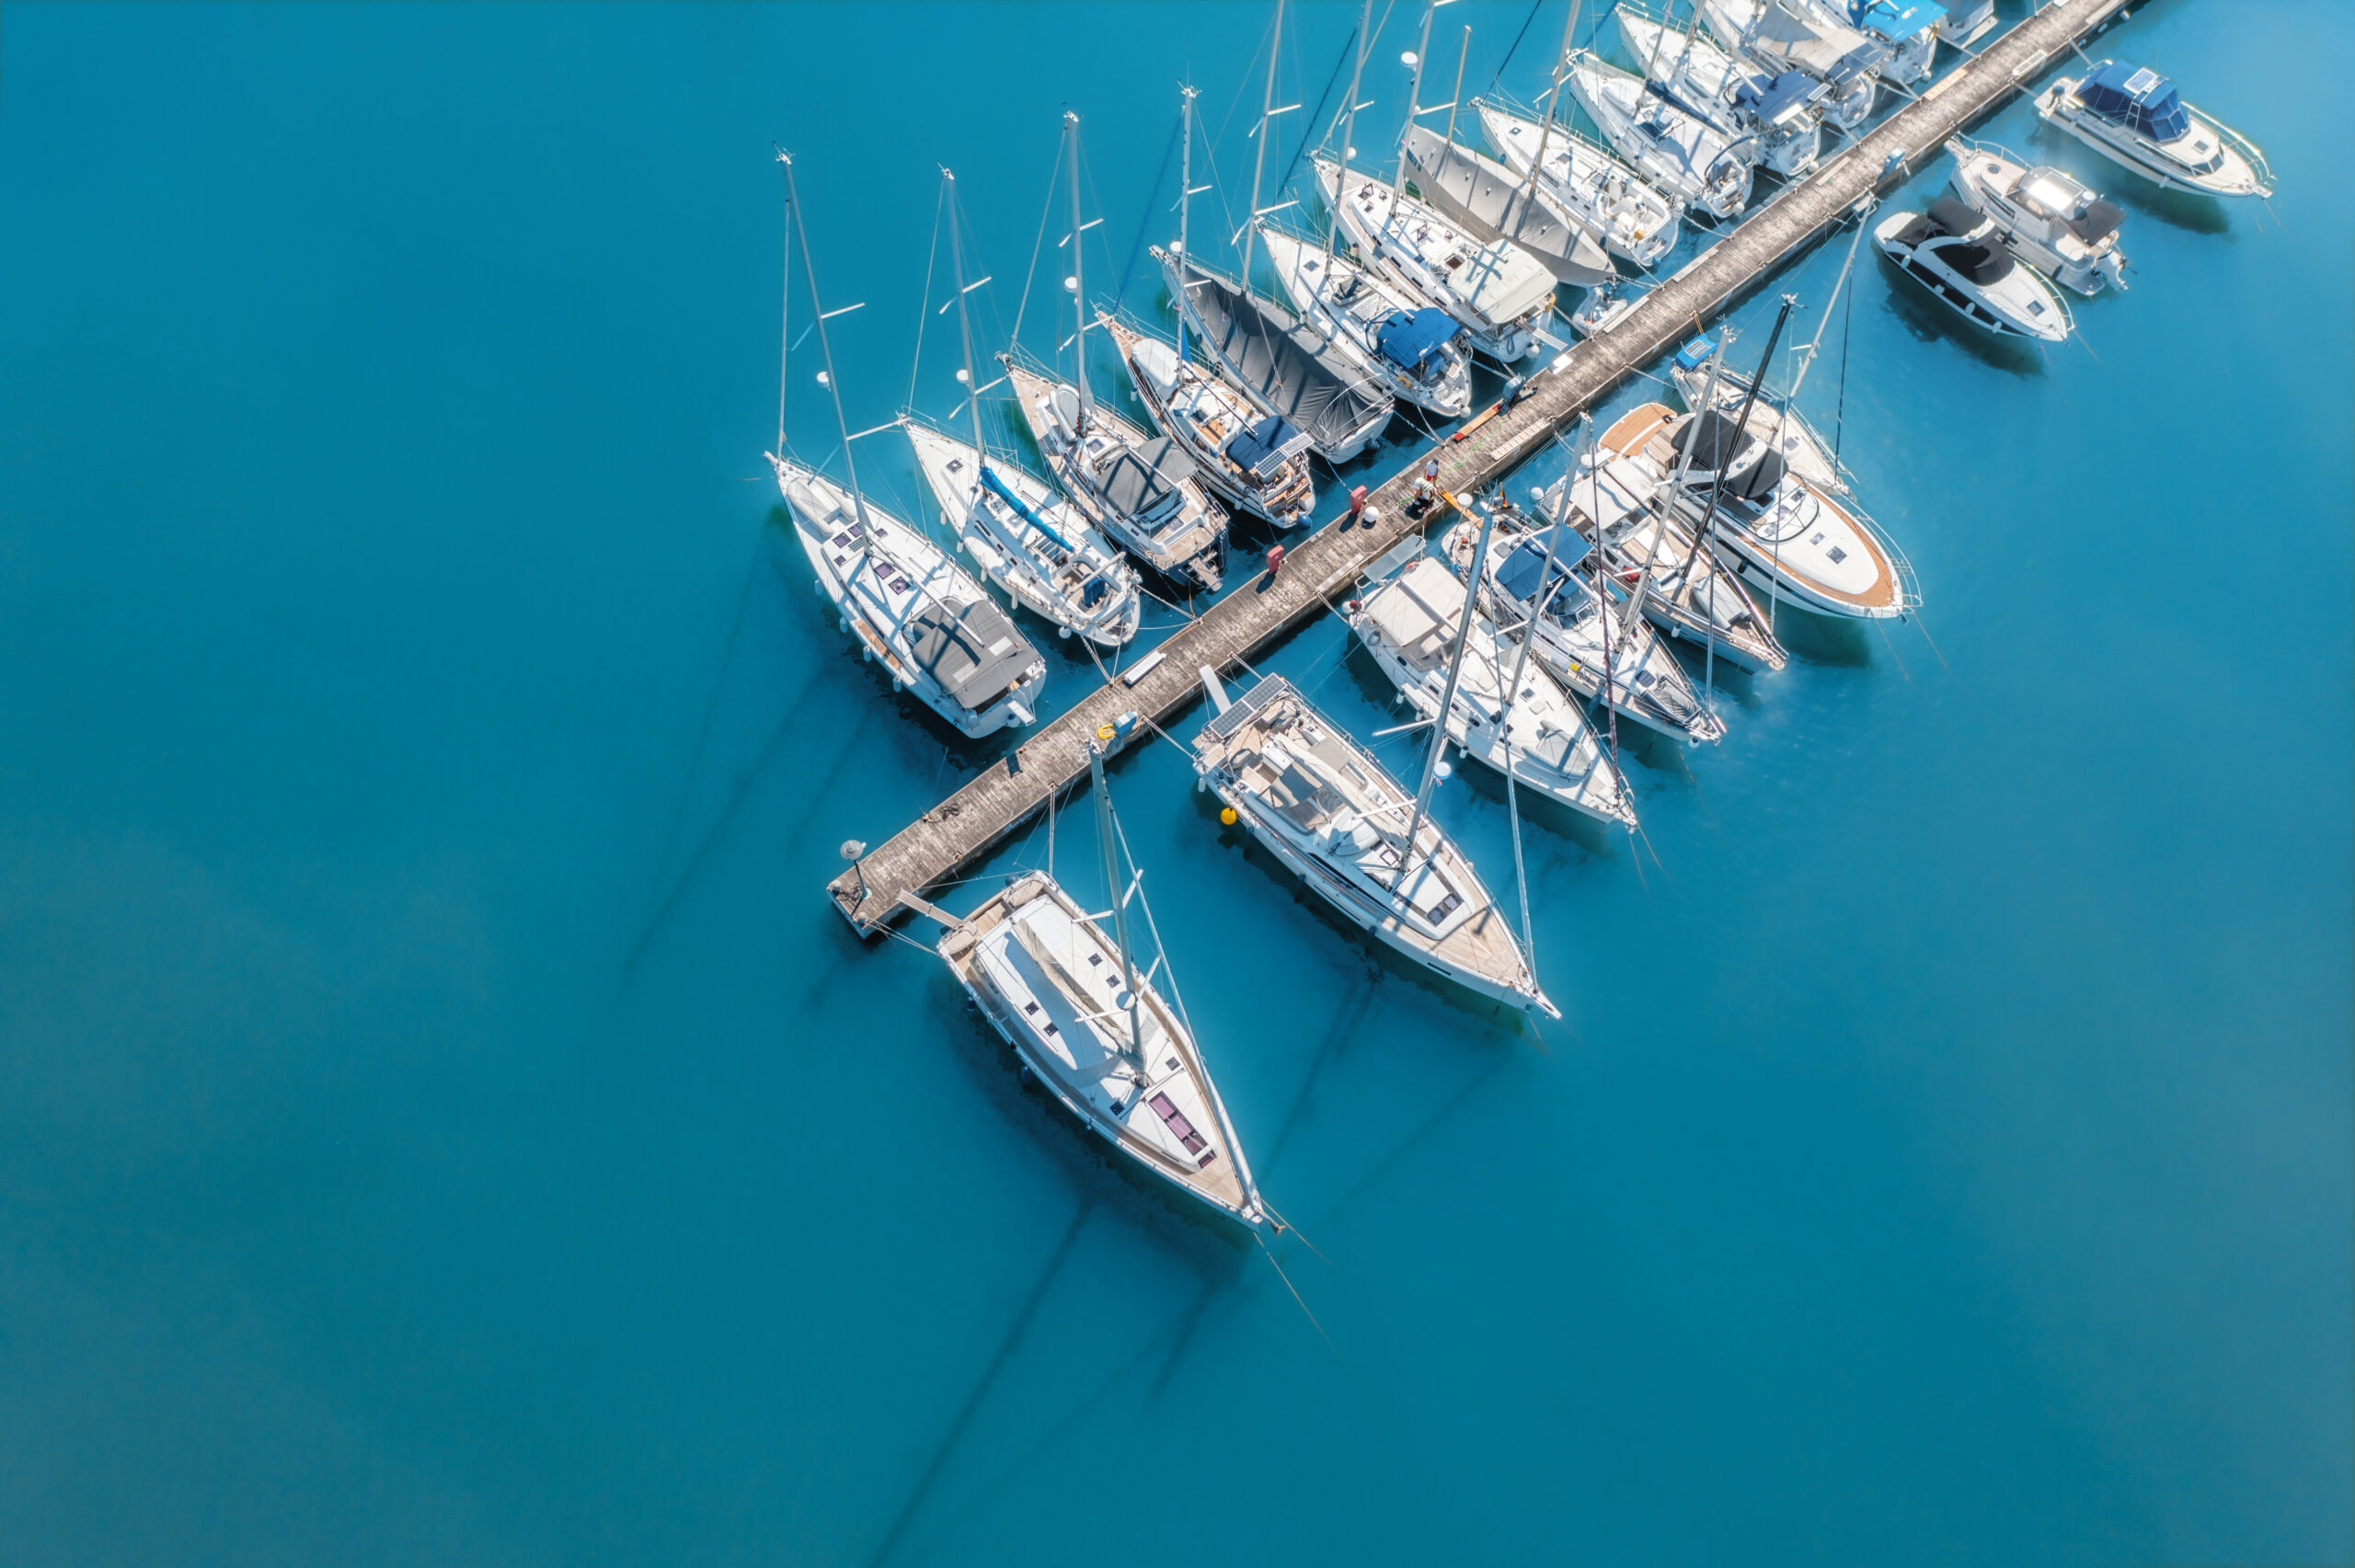 Aerial view of yachts and motorboats moored in a port with clear blue water in summer.